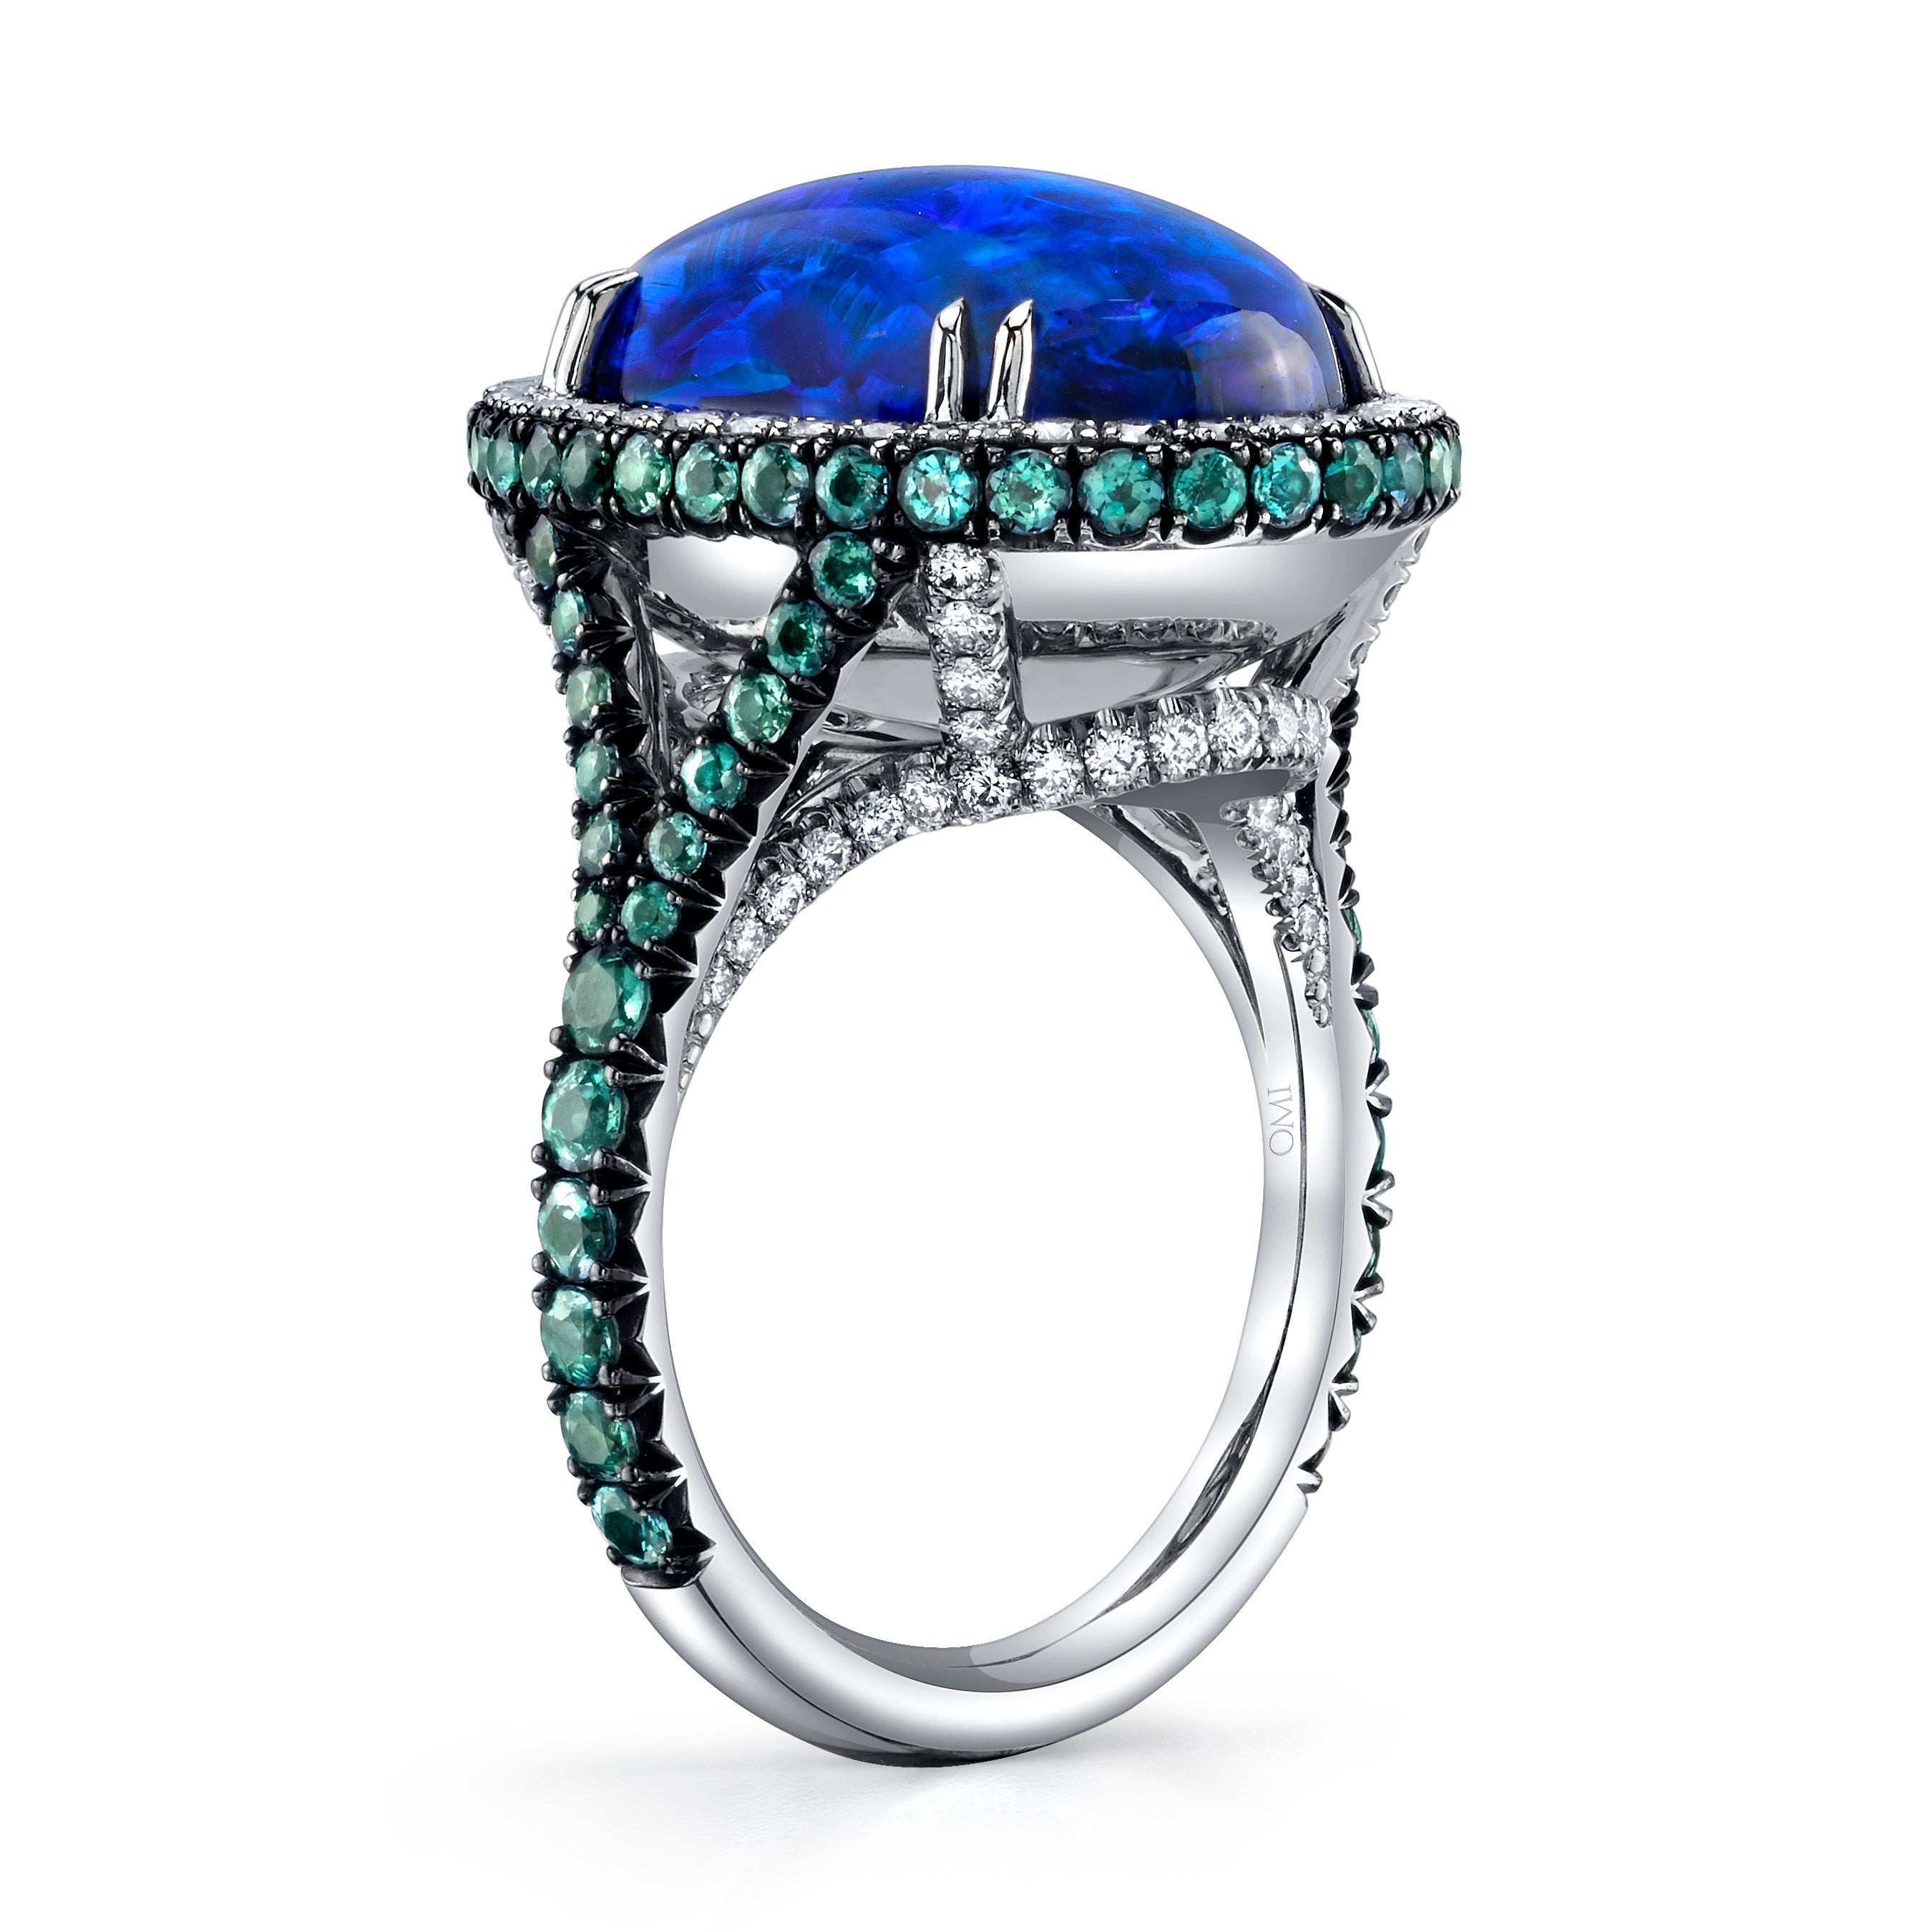 Omi Prive Platinum Oval Cabachon Opal Ring